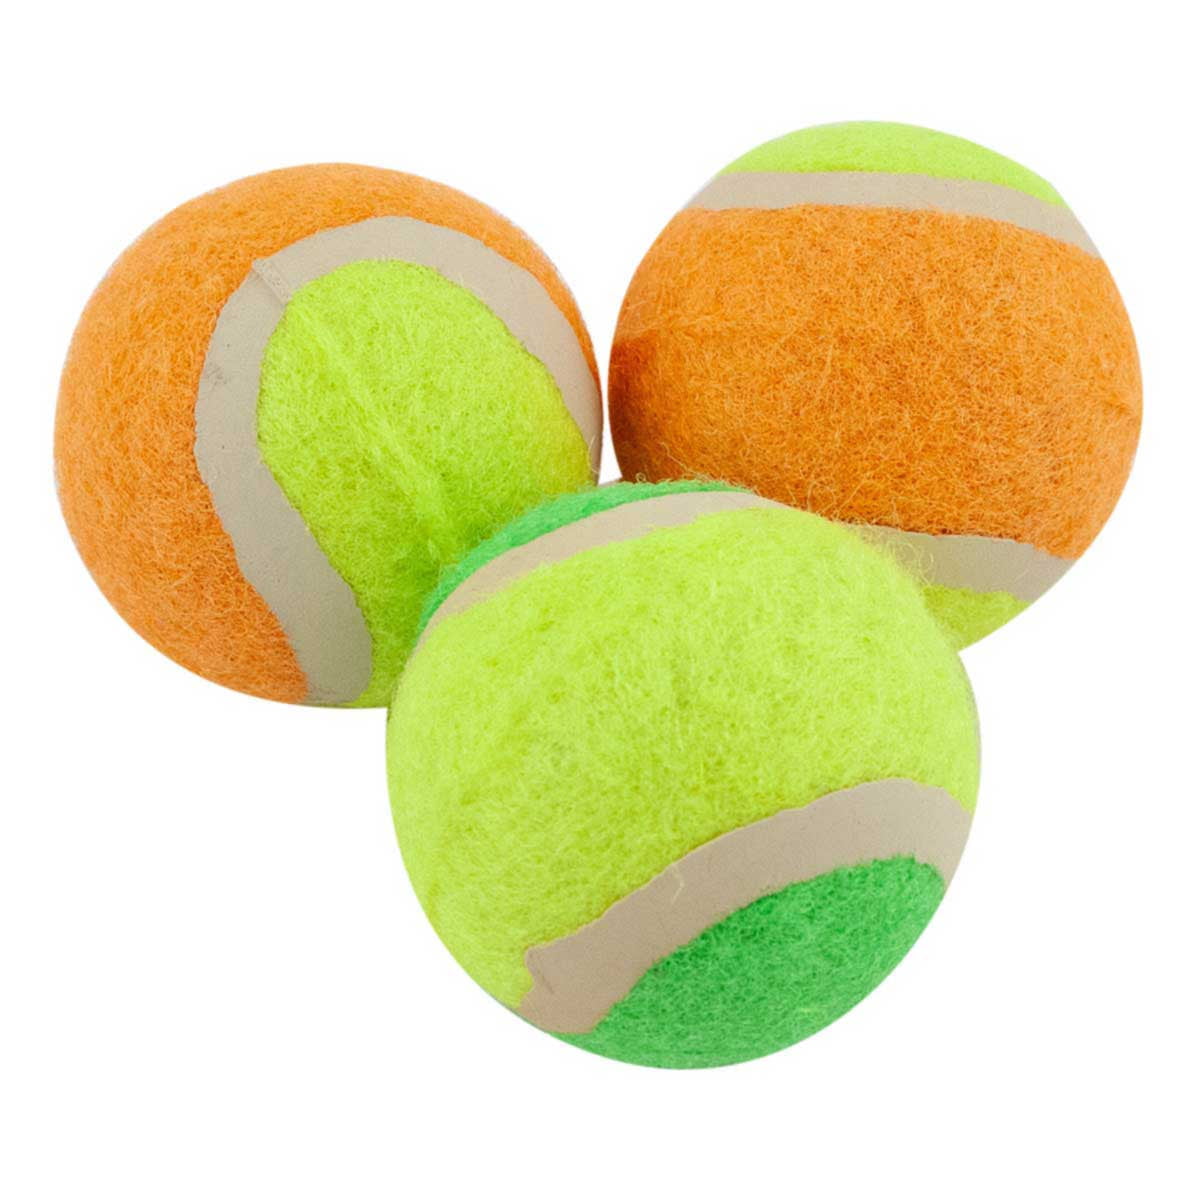 3 PACK Tennis Balls Durable Strong Sports Balls Light Green Colour Ideal For Outdoor Sports And Playing Fetch 